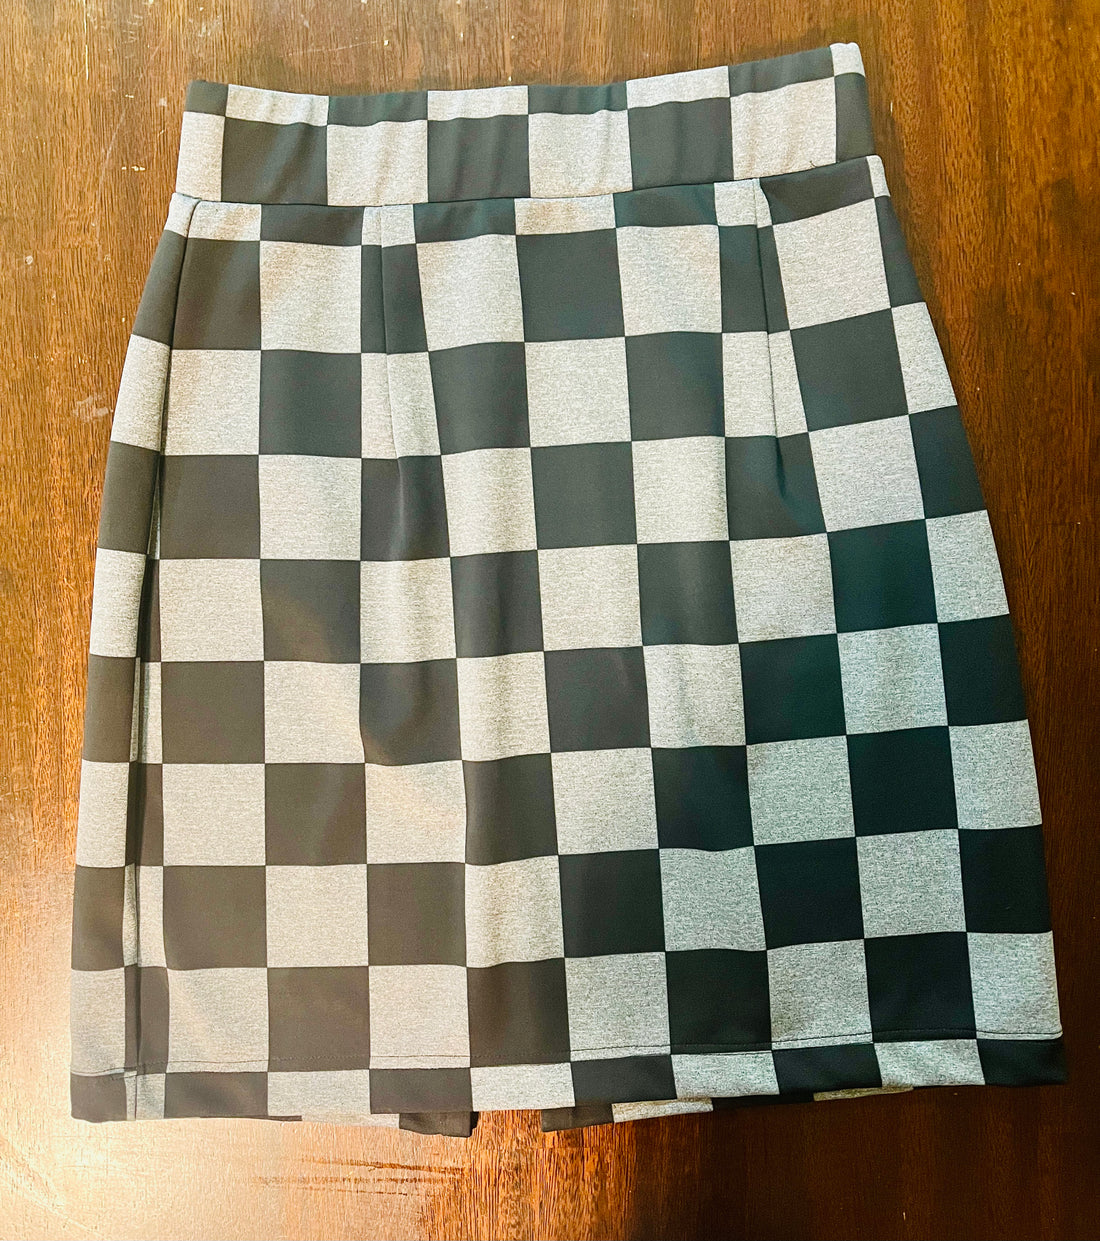 Chess Queen ECO Mini-Skirt (Free Shipping!)